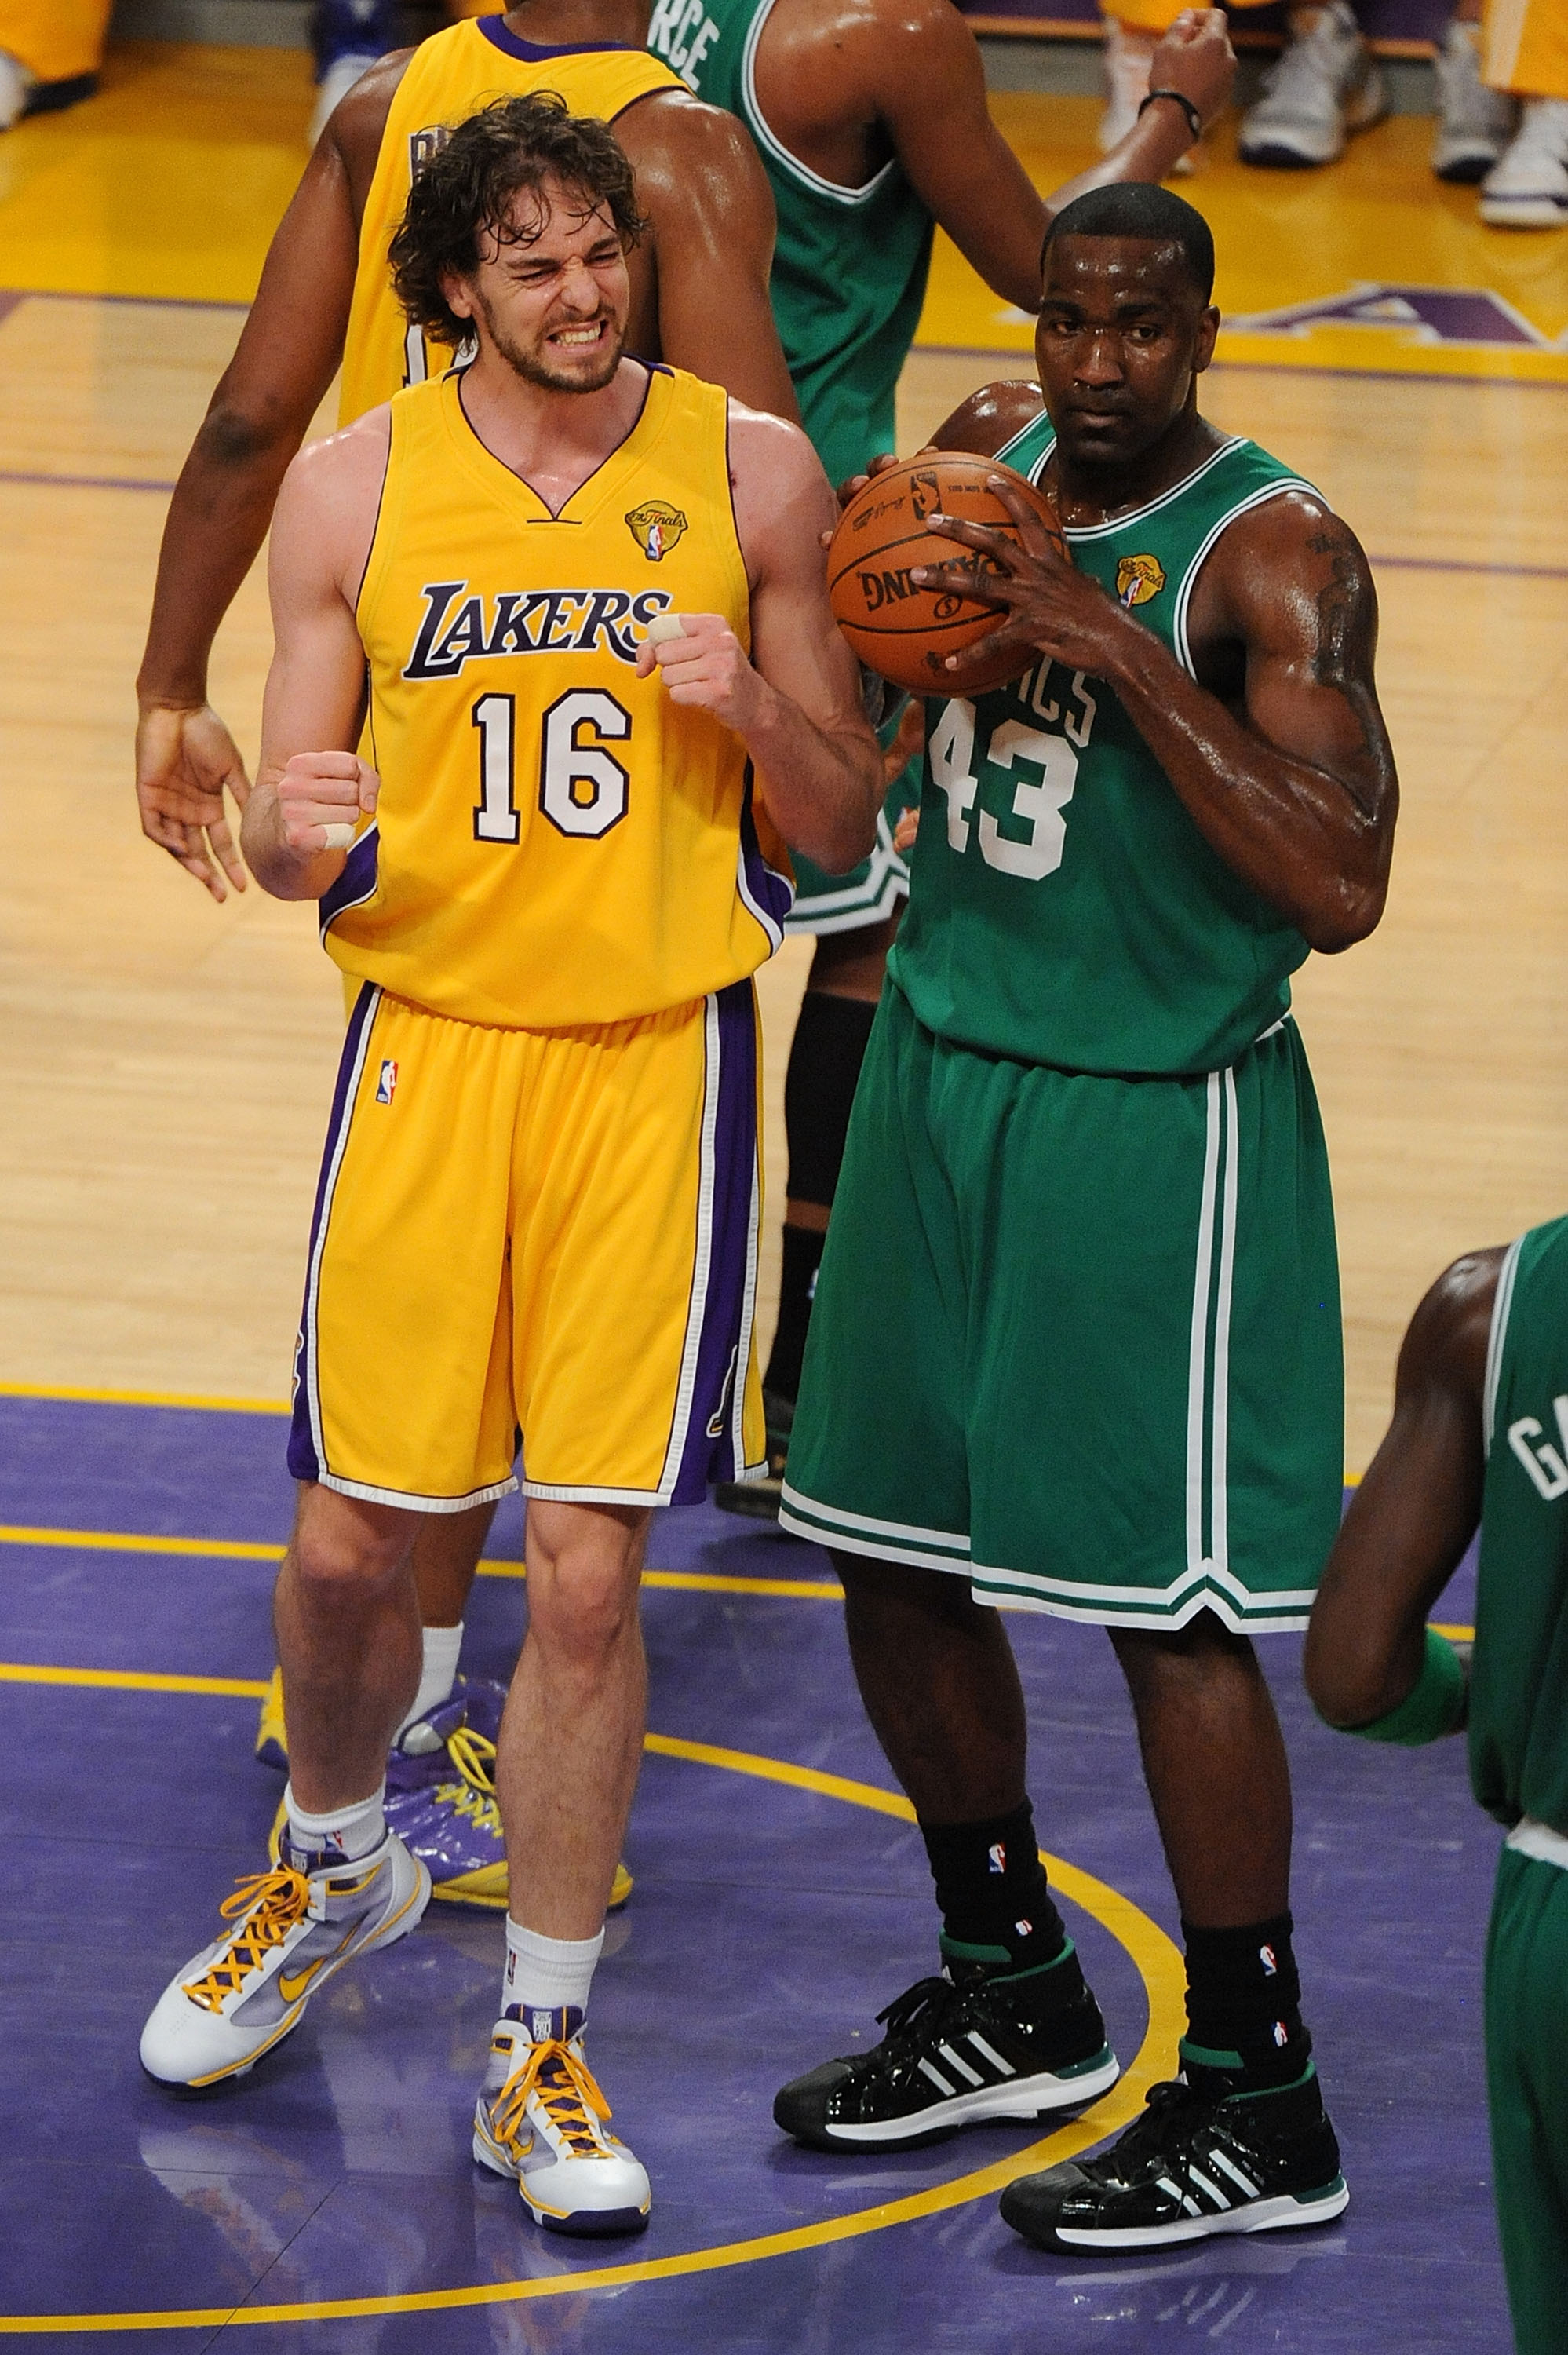 LOS ANGELES, CA - JUNE 15:  Pau Gasol #16 of the Los Angeles Lakers reacts alongside Kendrick Perkins #43 of the Boston Celtics in the first period of Game Six of the 2010 NBA Finals at Staples Center on June 15, 2010 in Los Angeles, California.  NOTE TO